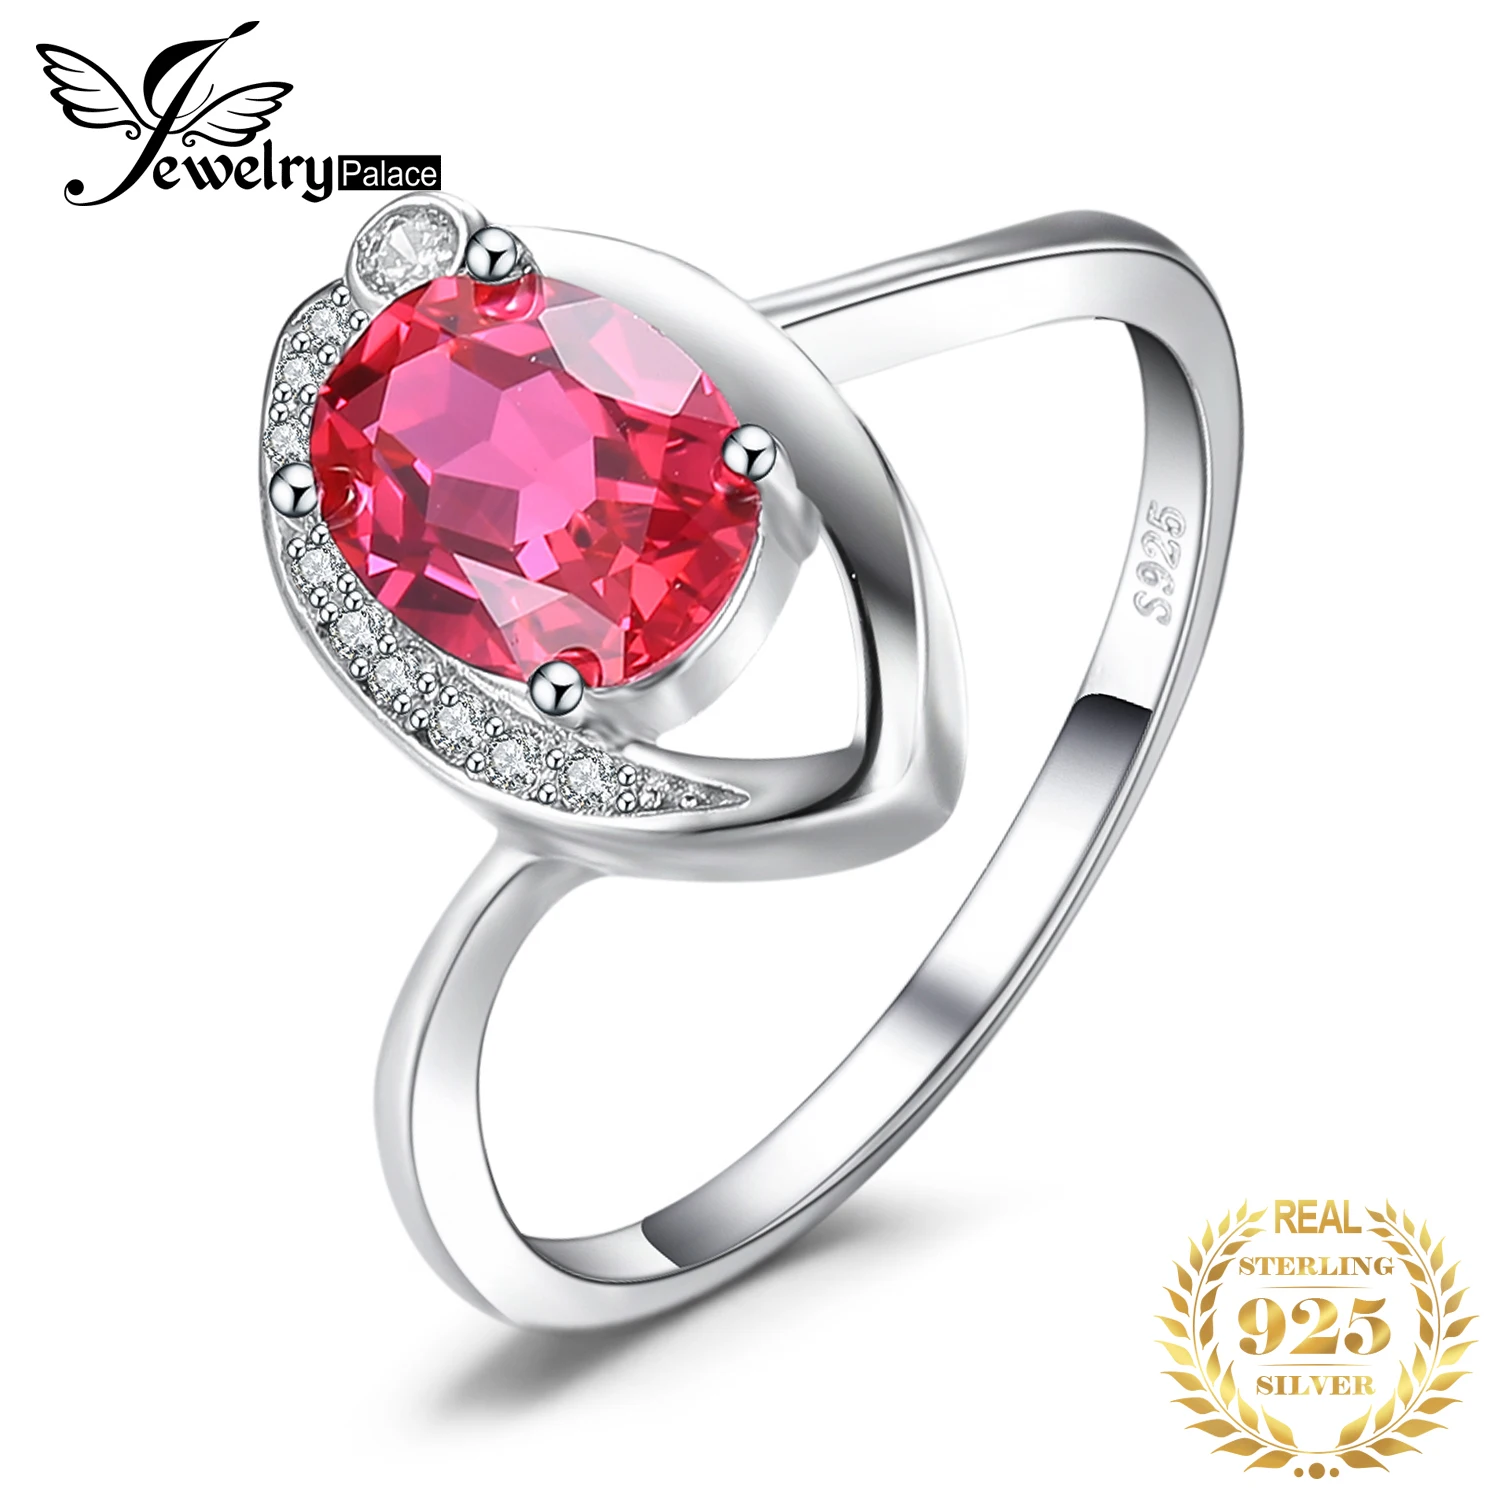 

JewelryPalace Eye 1.4ct Red Created Ruby 925 Sterling Silver Ring for Women Fashion Statement Gemstone Jewelry Anniversary Gift